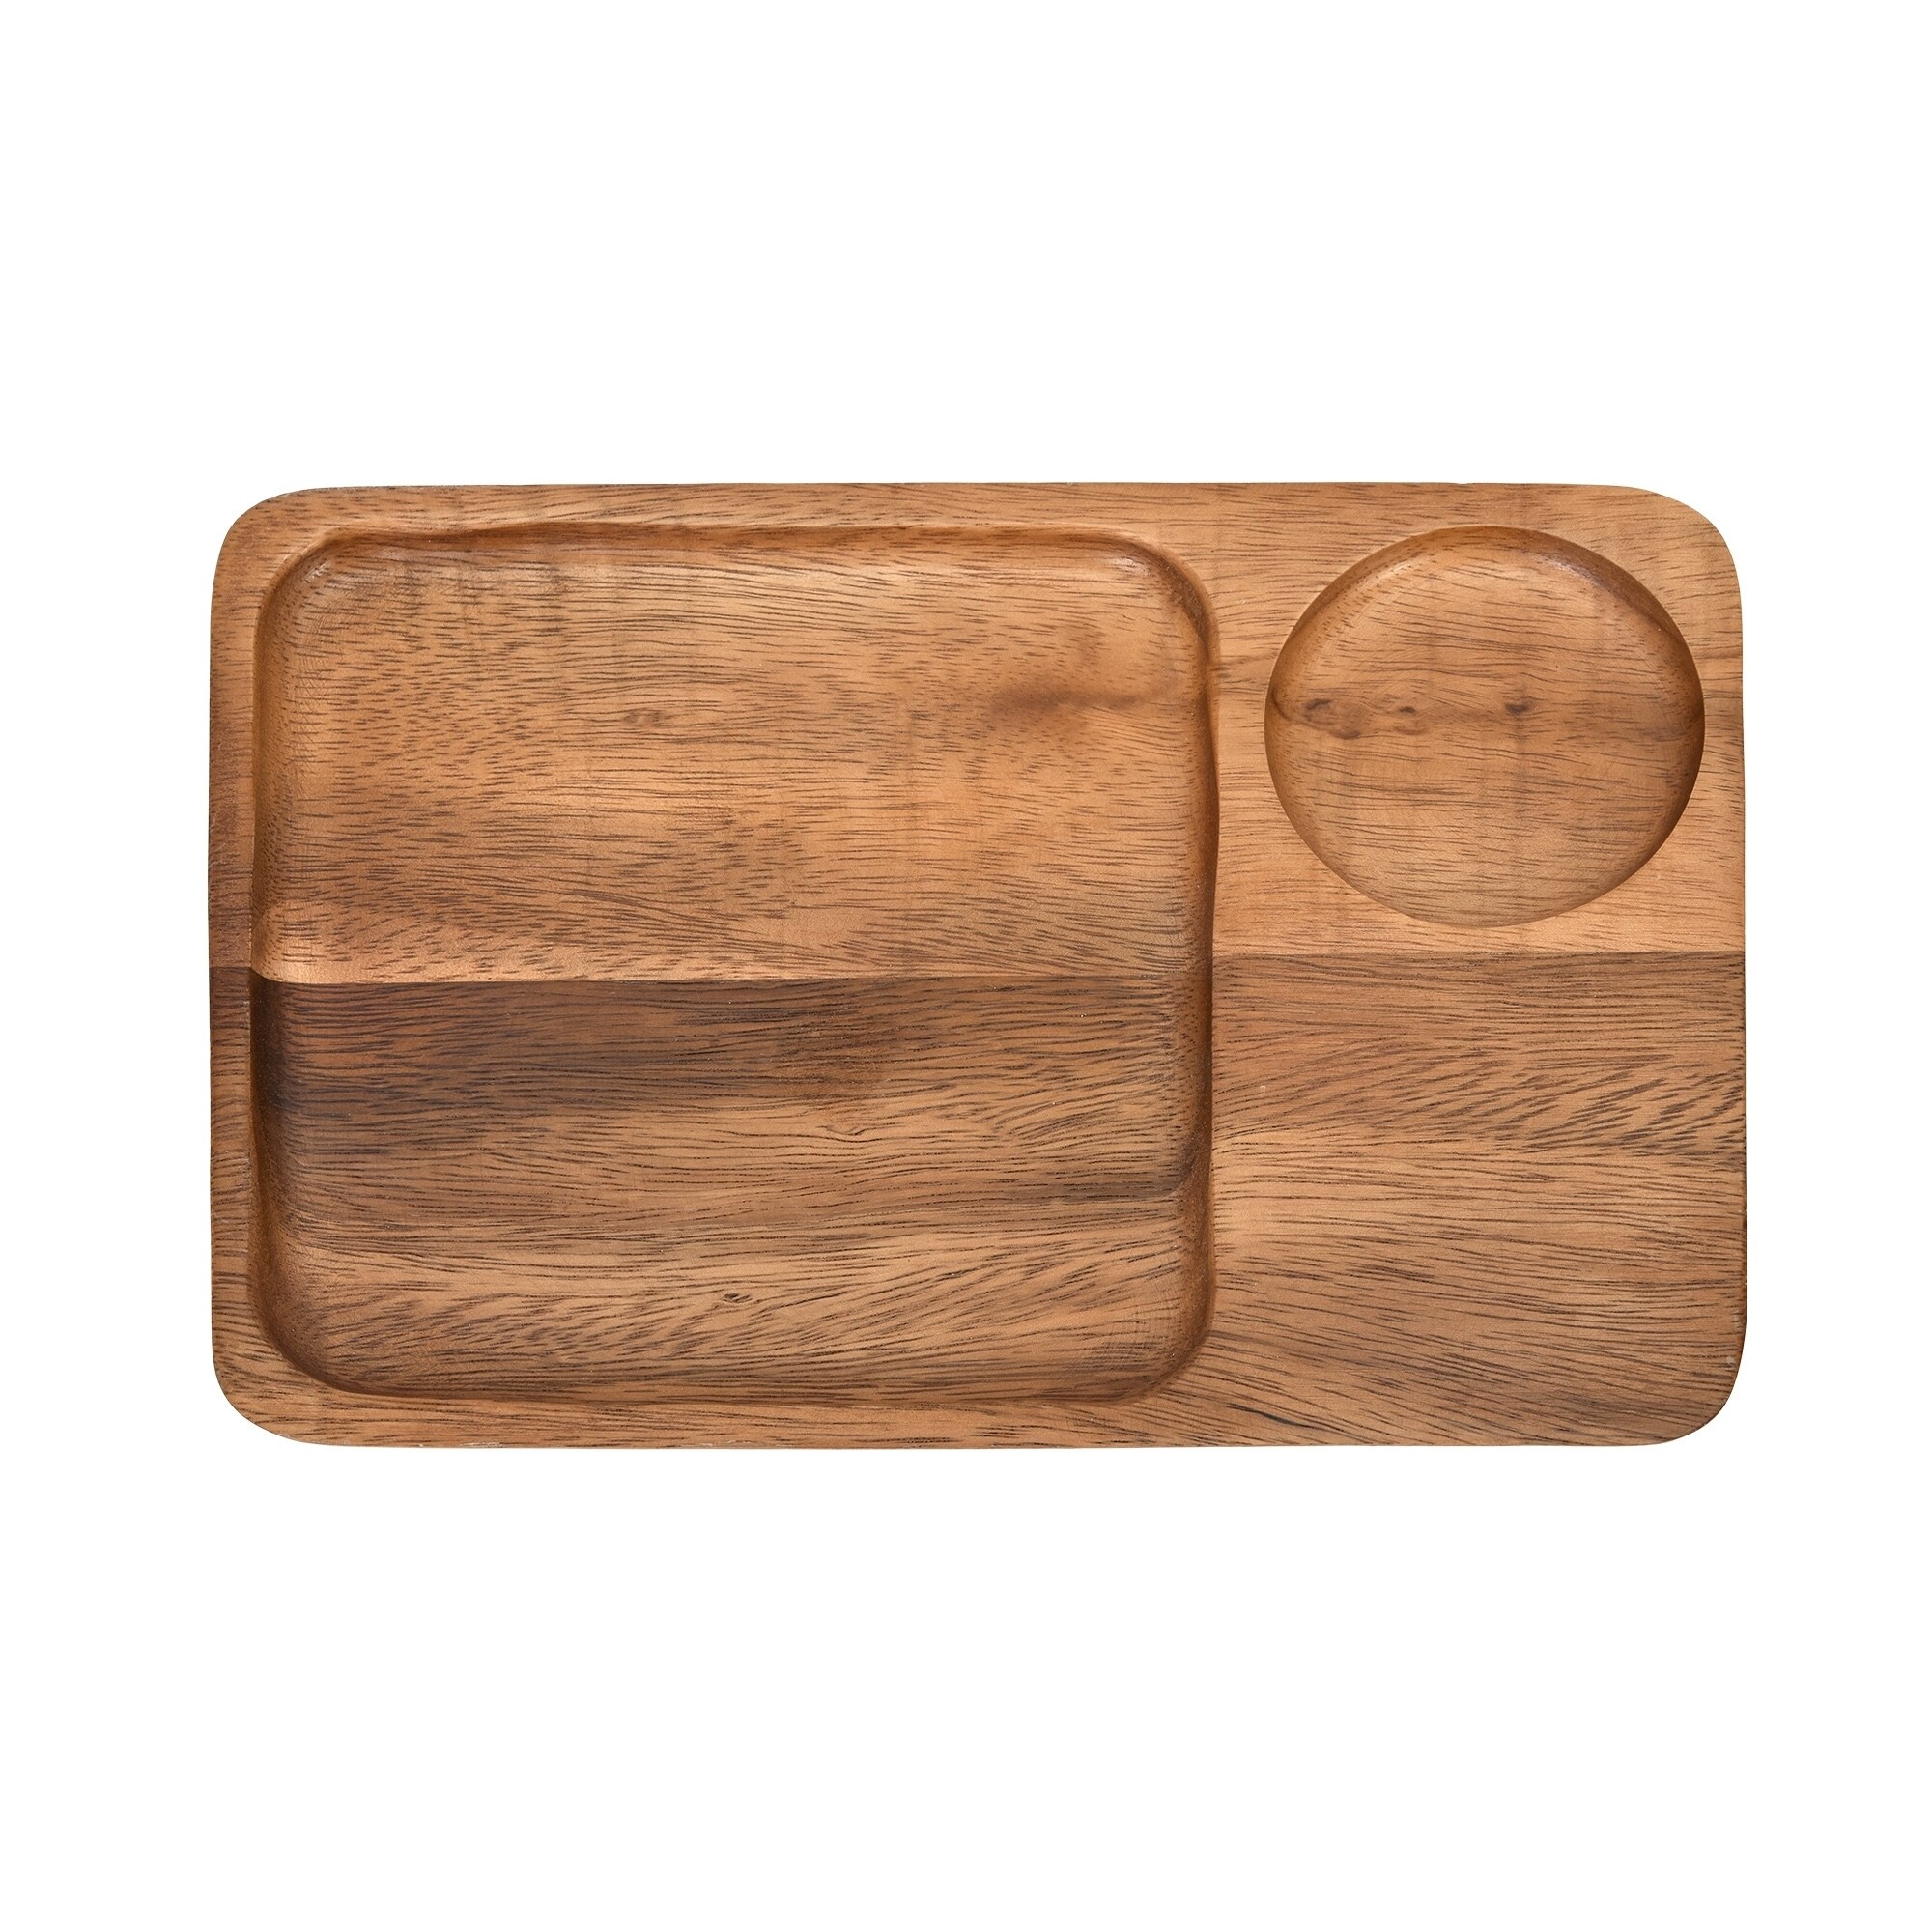 Wooden Rectangular Plate Holder with Rod, For Home and Kitchen